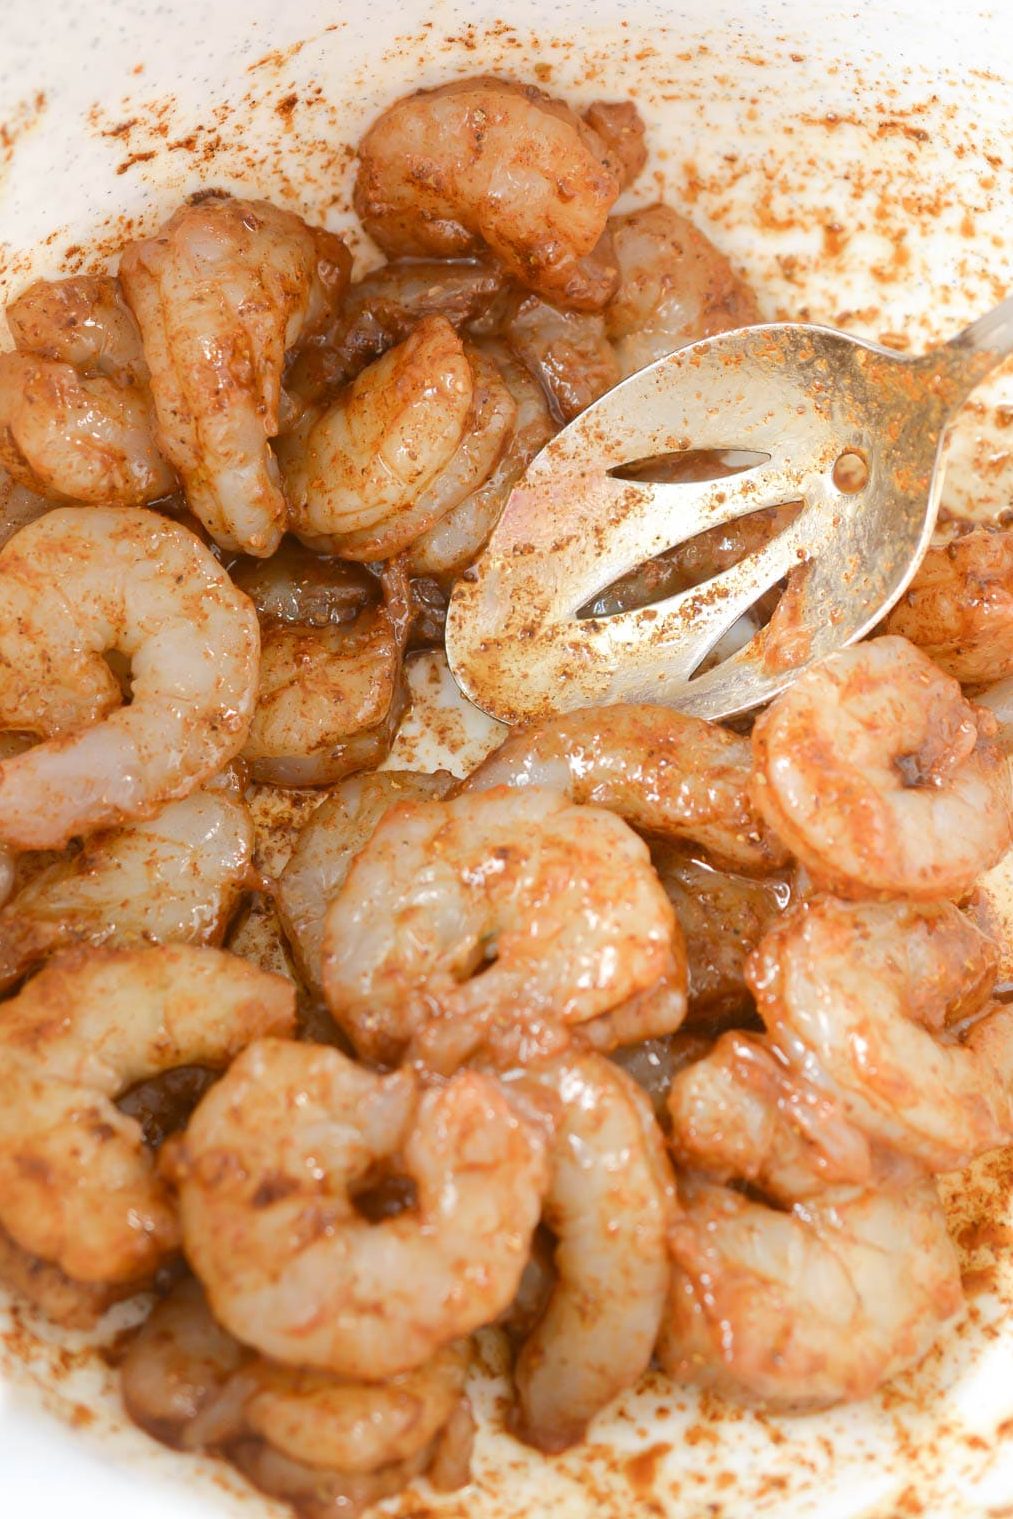 In a bowl, coat the shrimp in olive oil and Old Bay seasoning. Mix to combine.